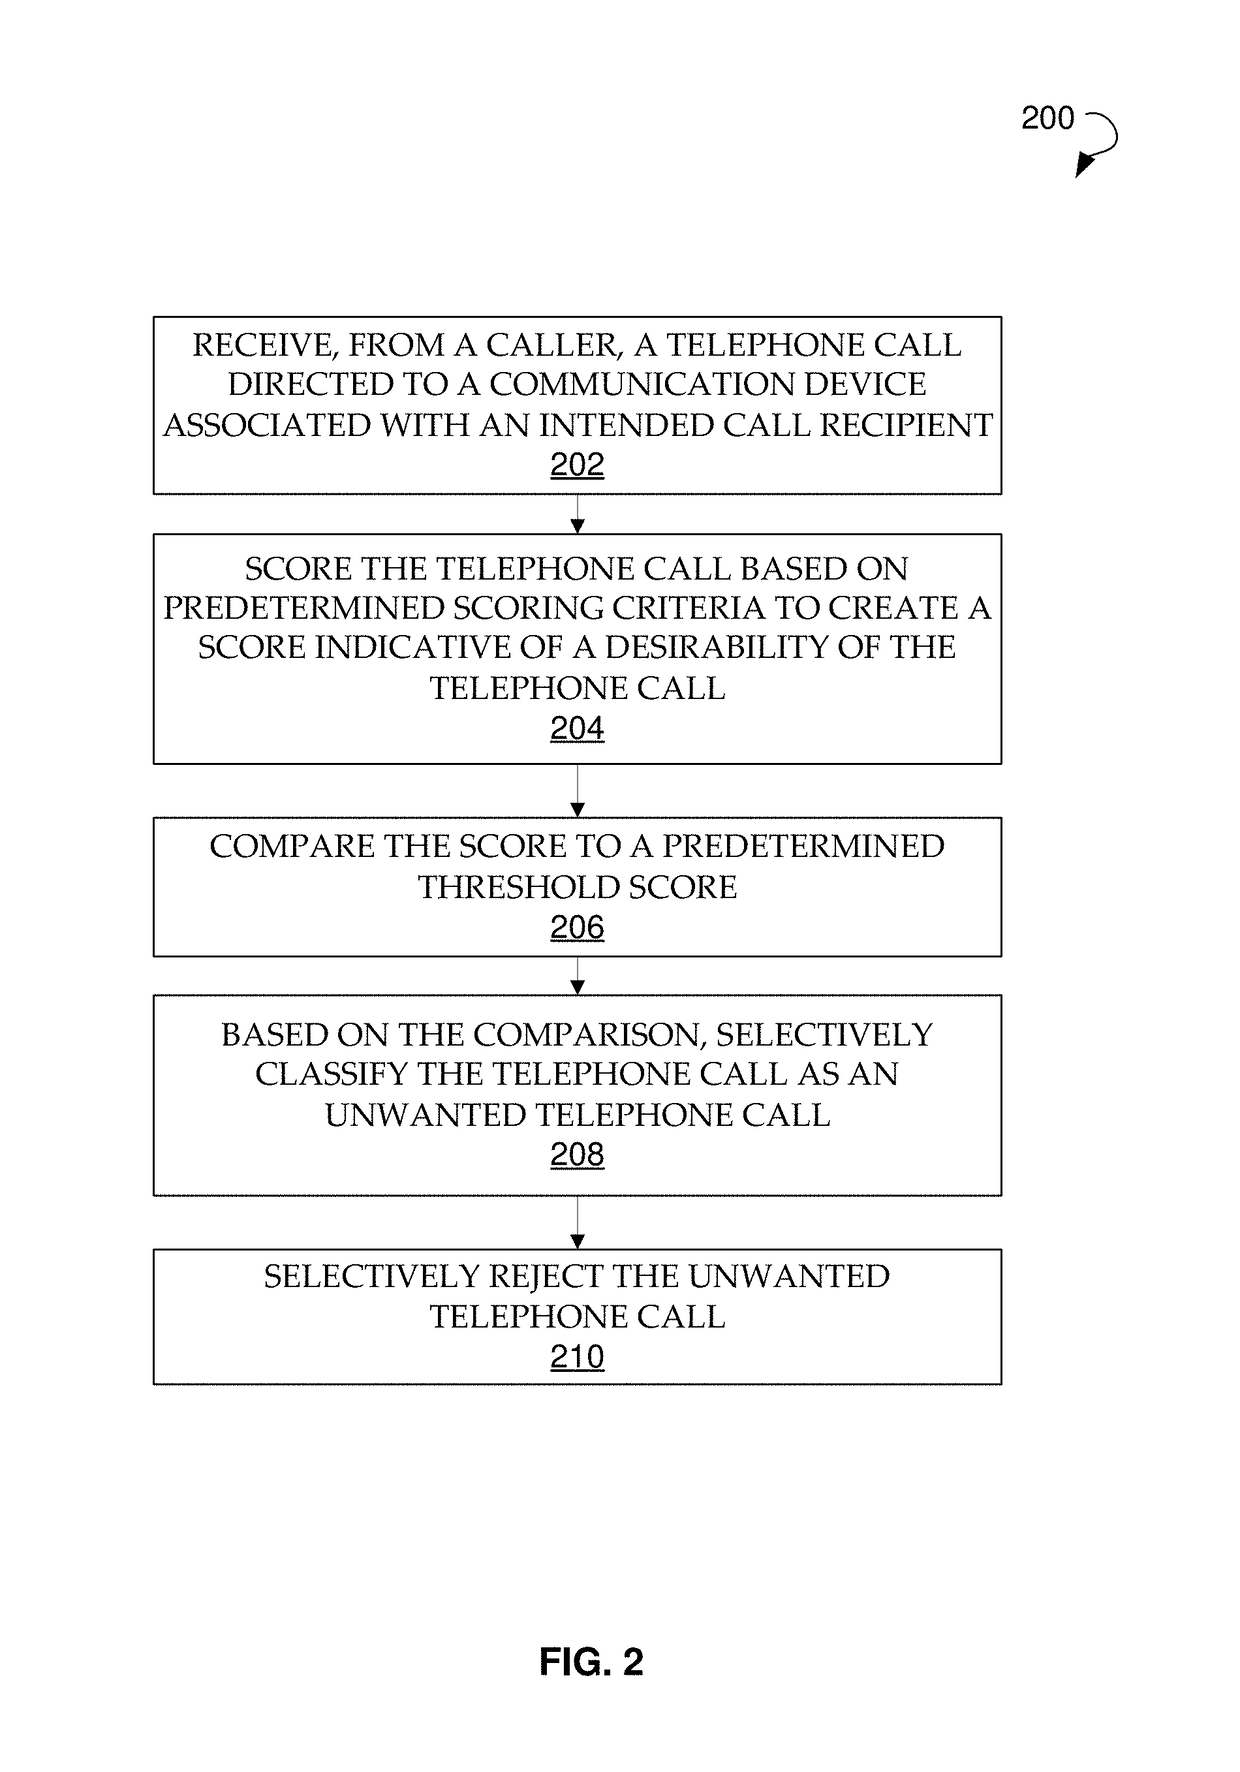 Identifying and filtering incoming telephone calls to enhance privacy